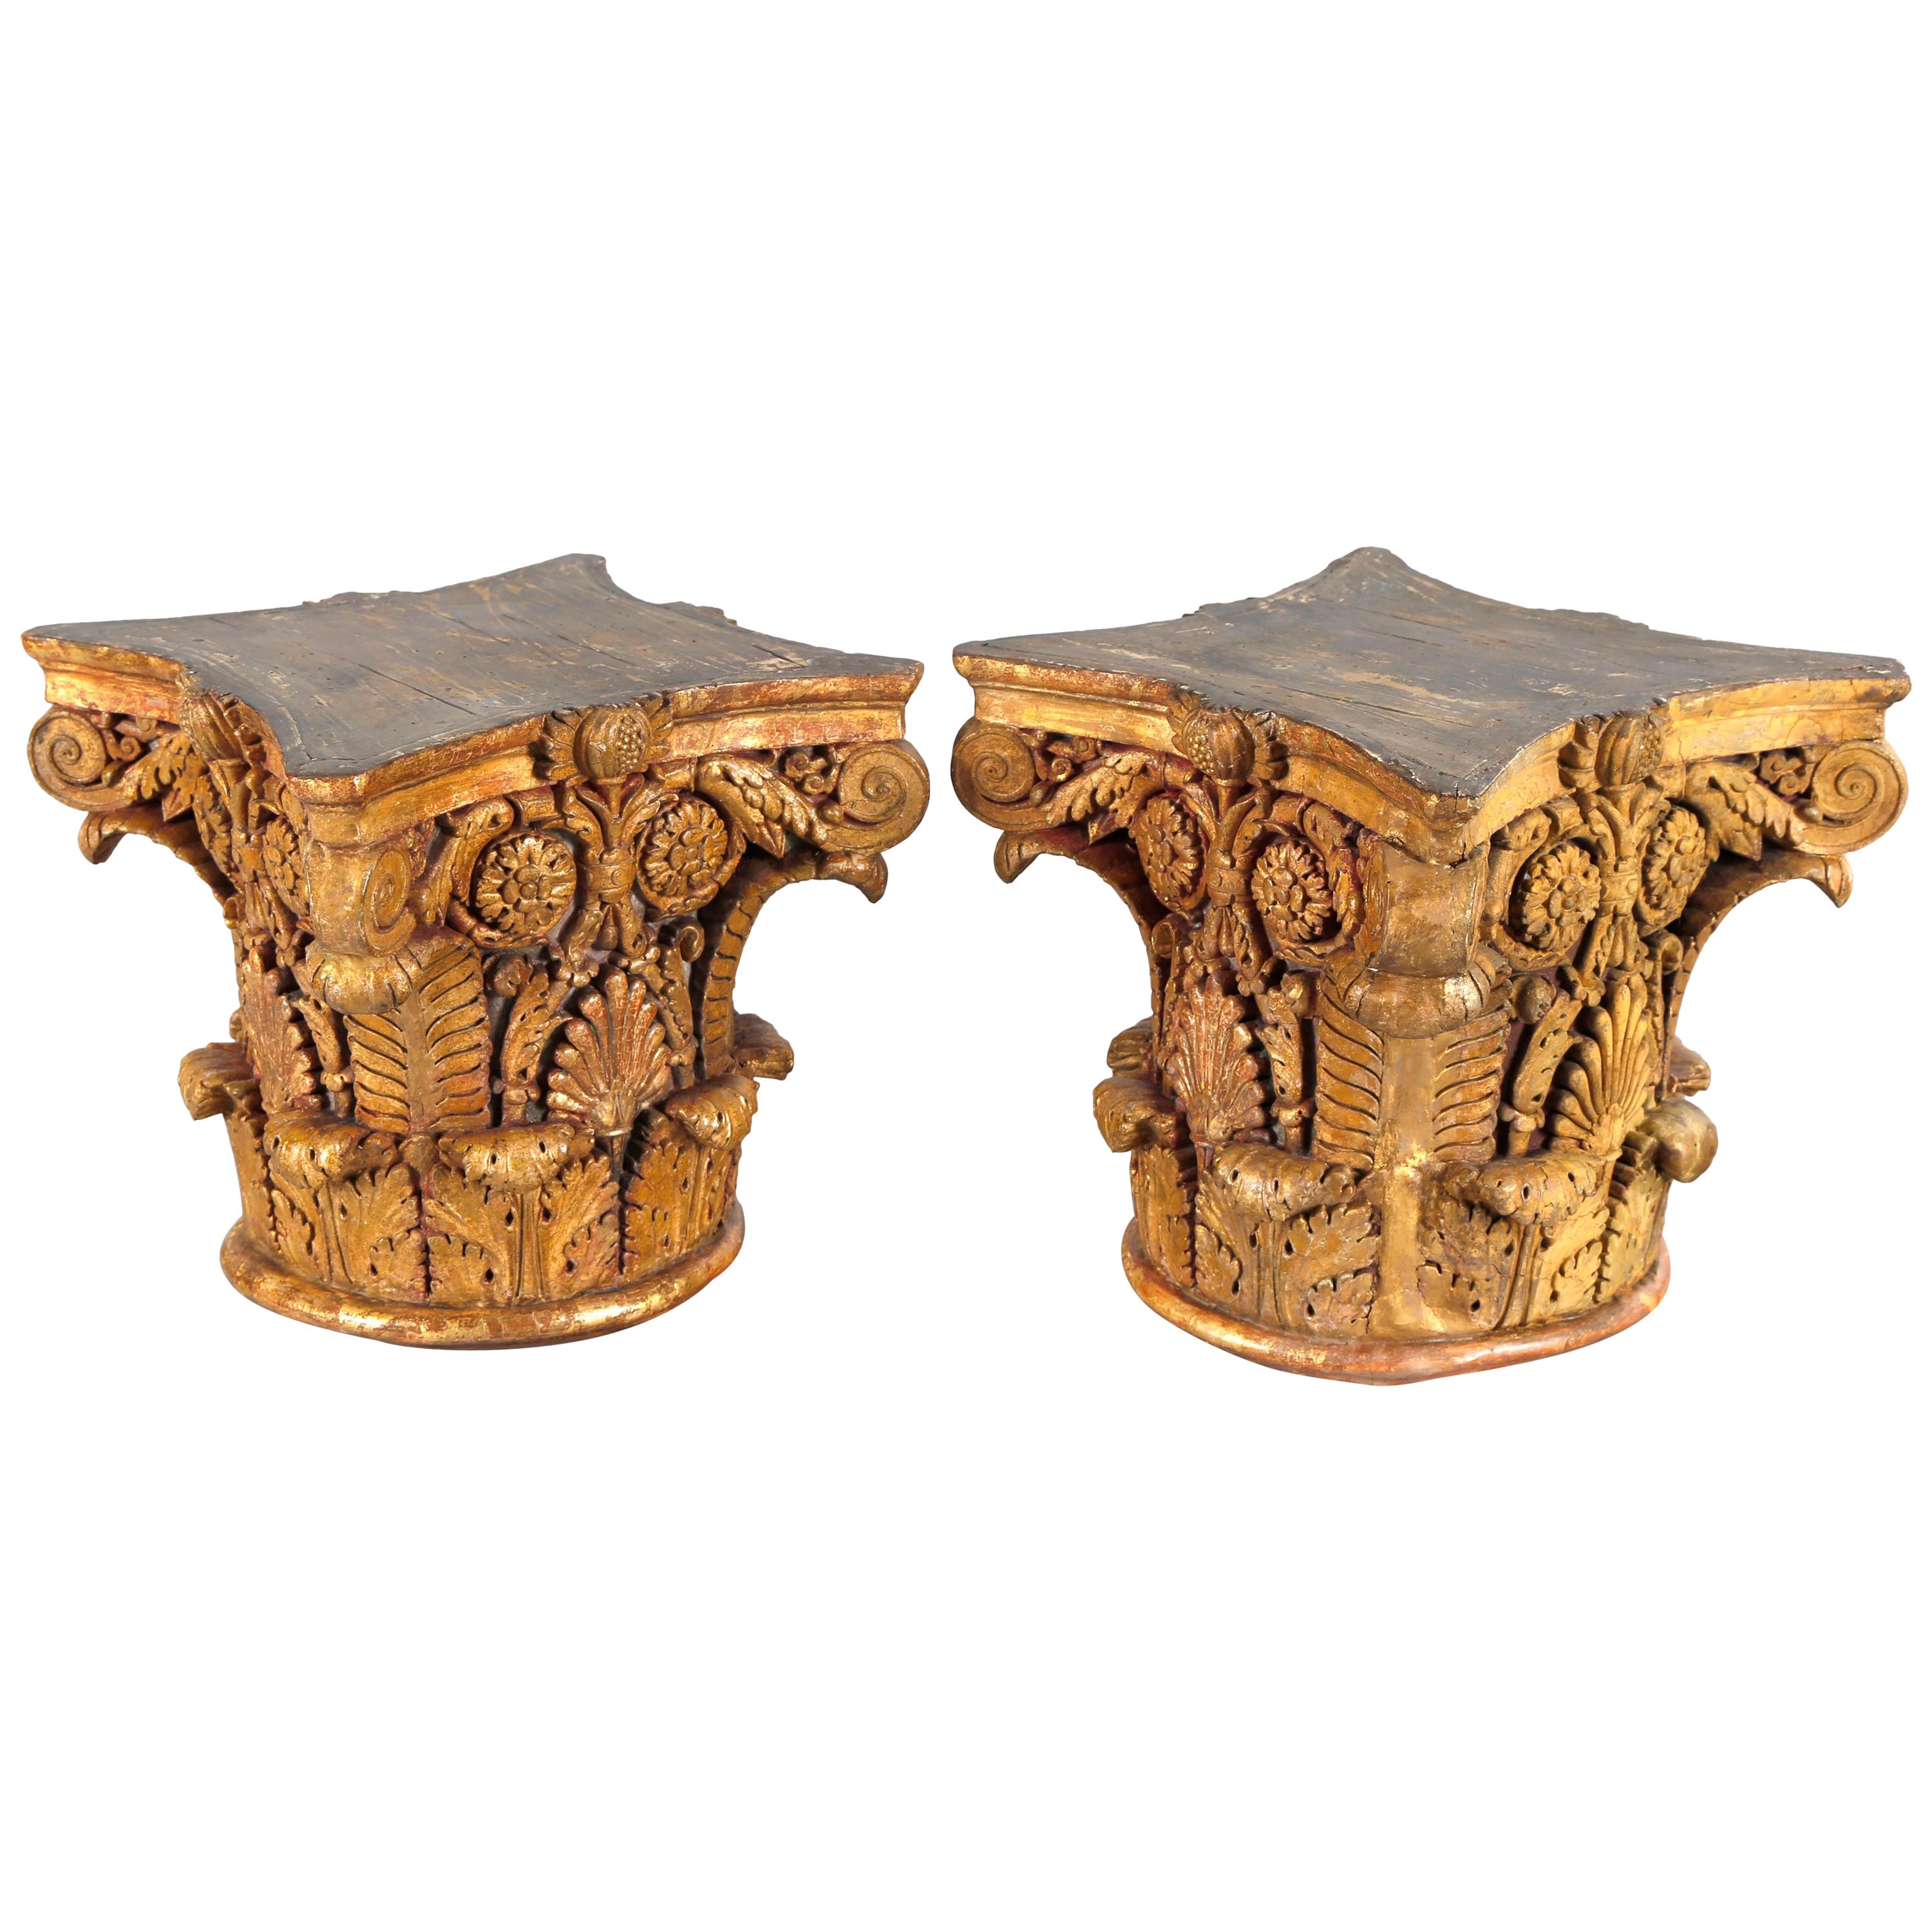 Pair of French Richly Carved circa 1790 Corinthian Capitals